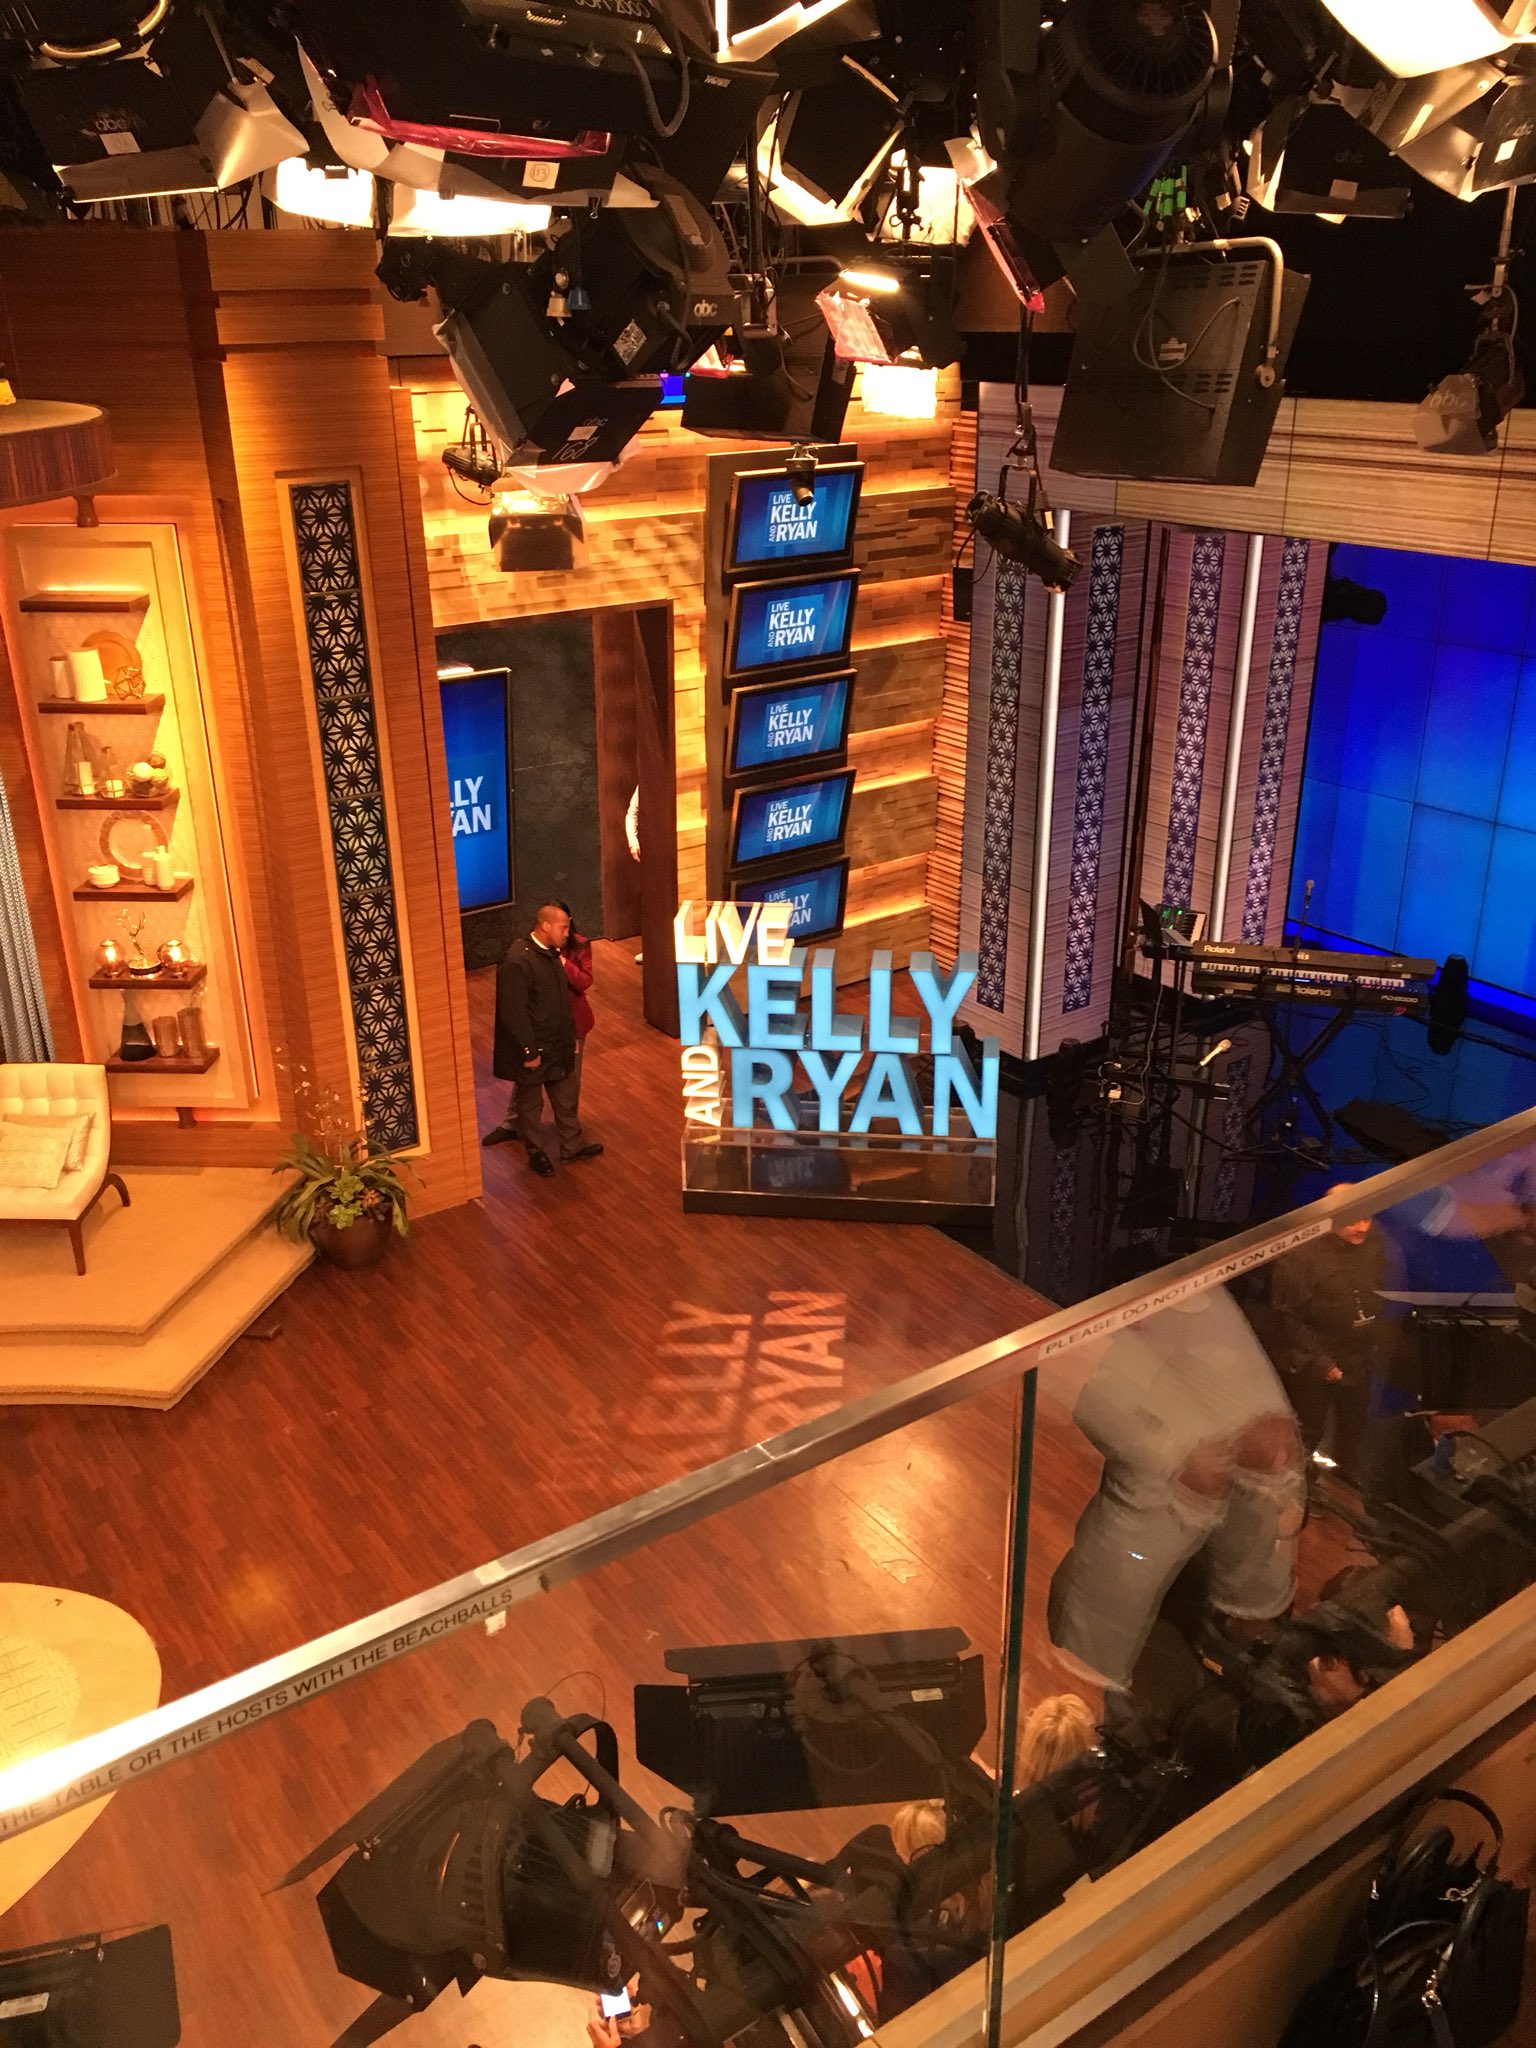 2018/04/30 - David on Live with Kelly and Ryan DcCDfXjV4AAcWIg